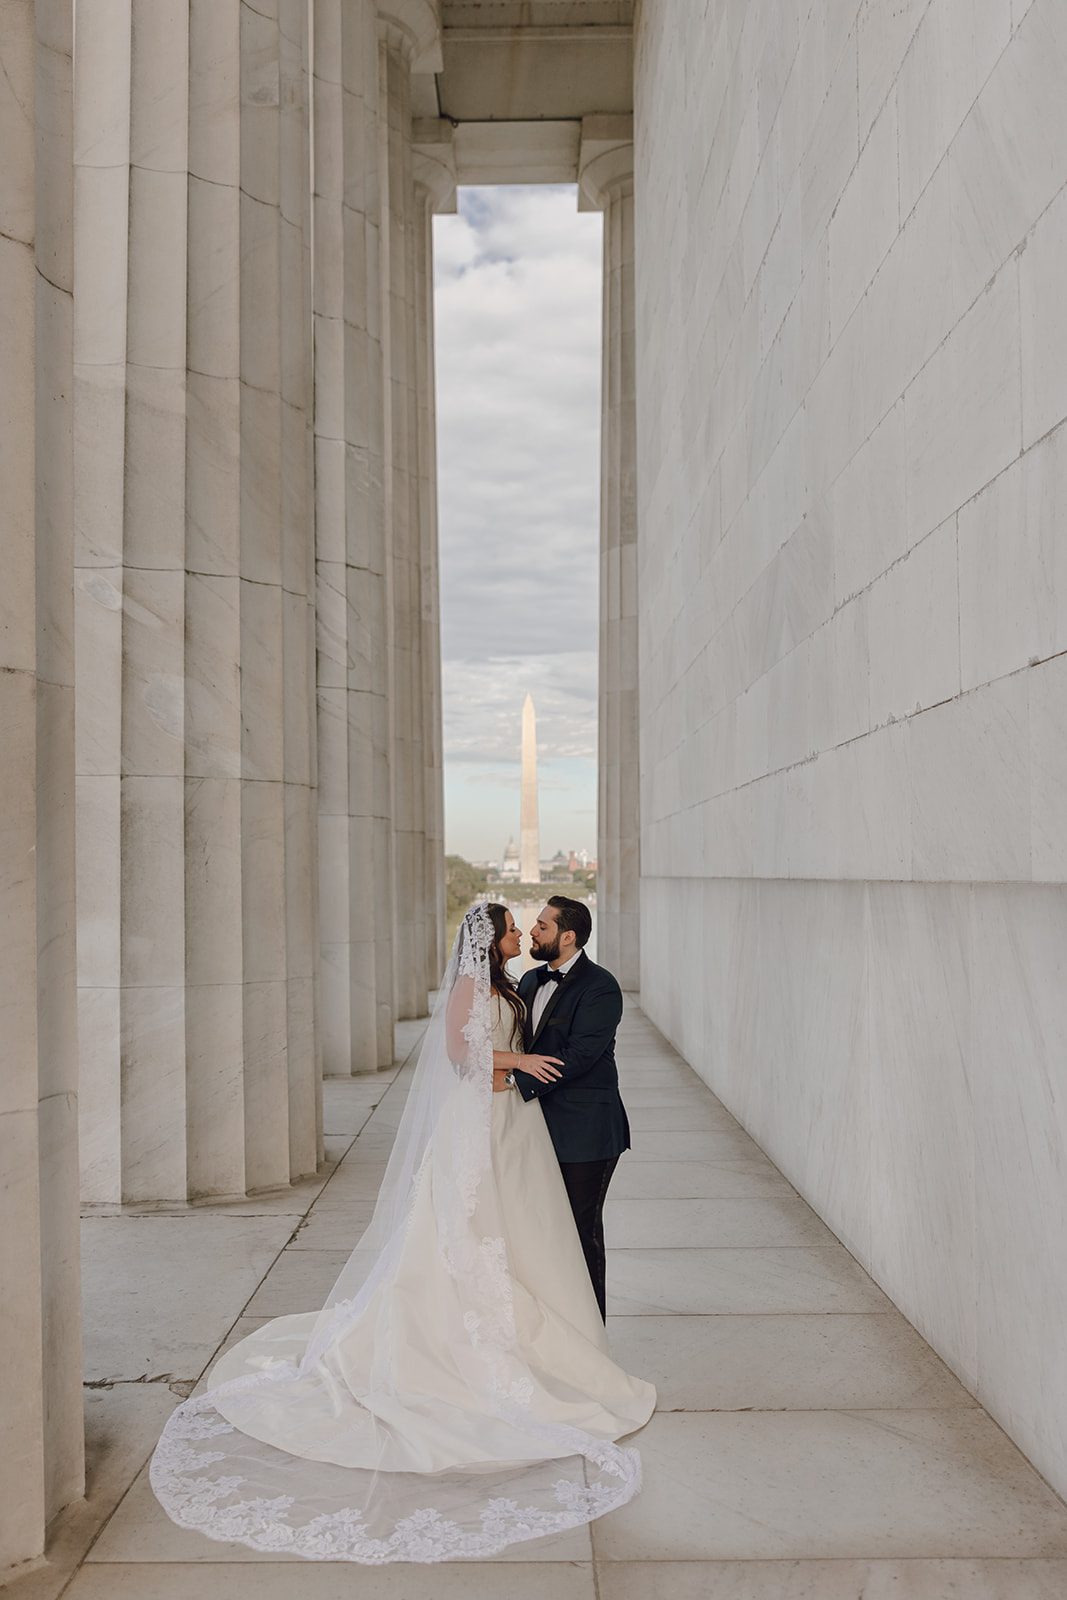 the couple looking at one another in Washington DC